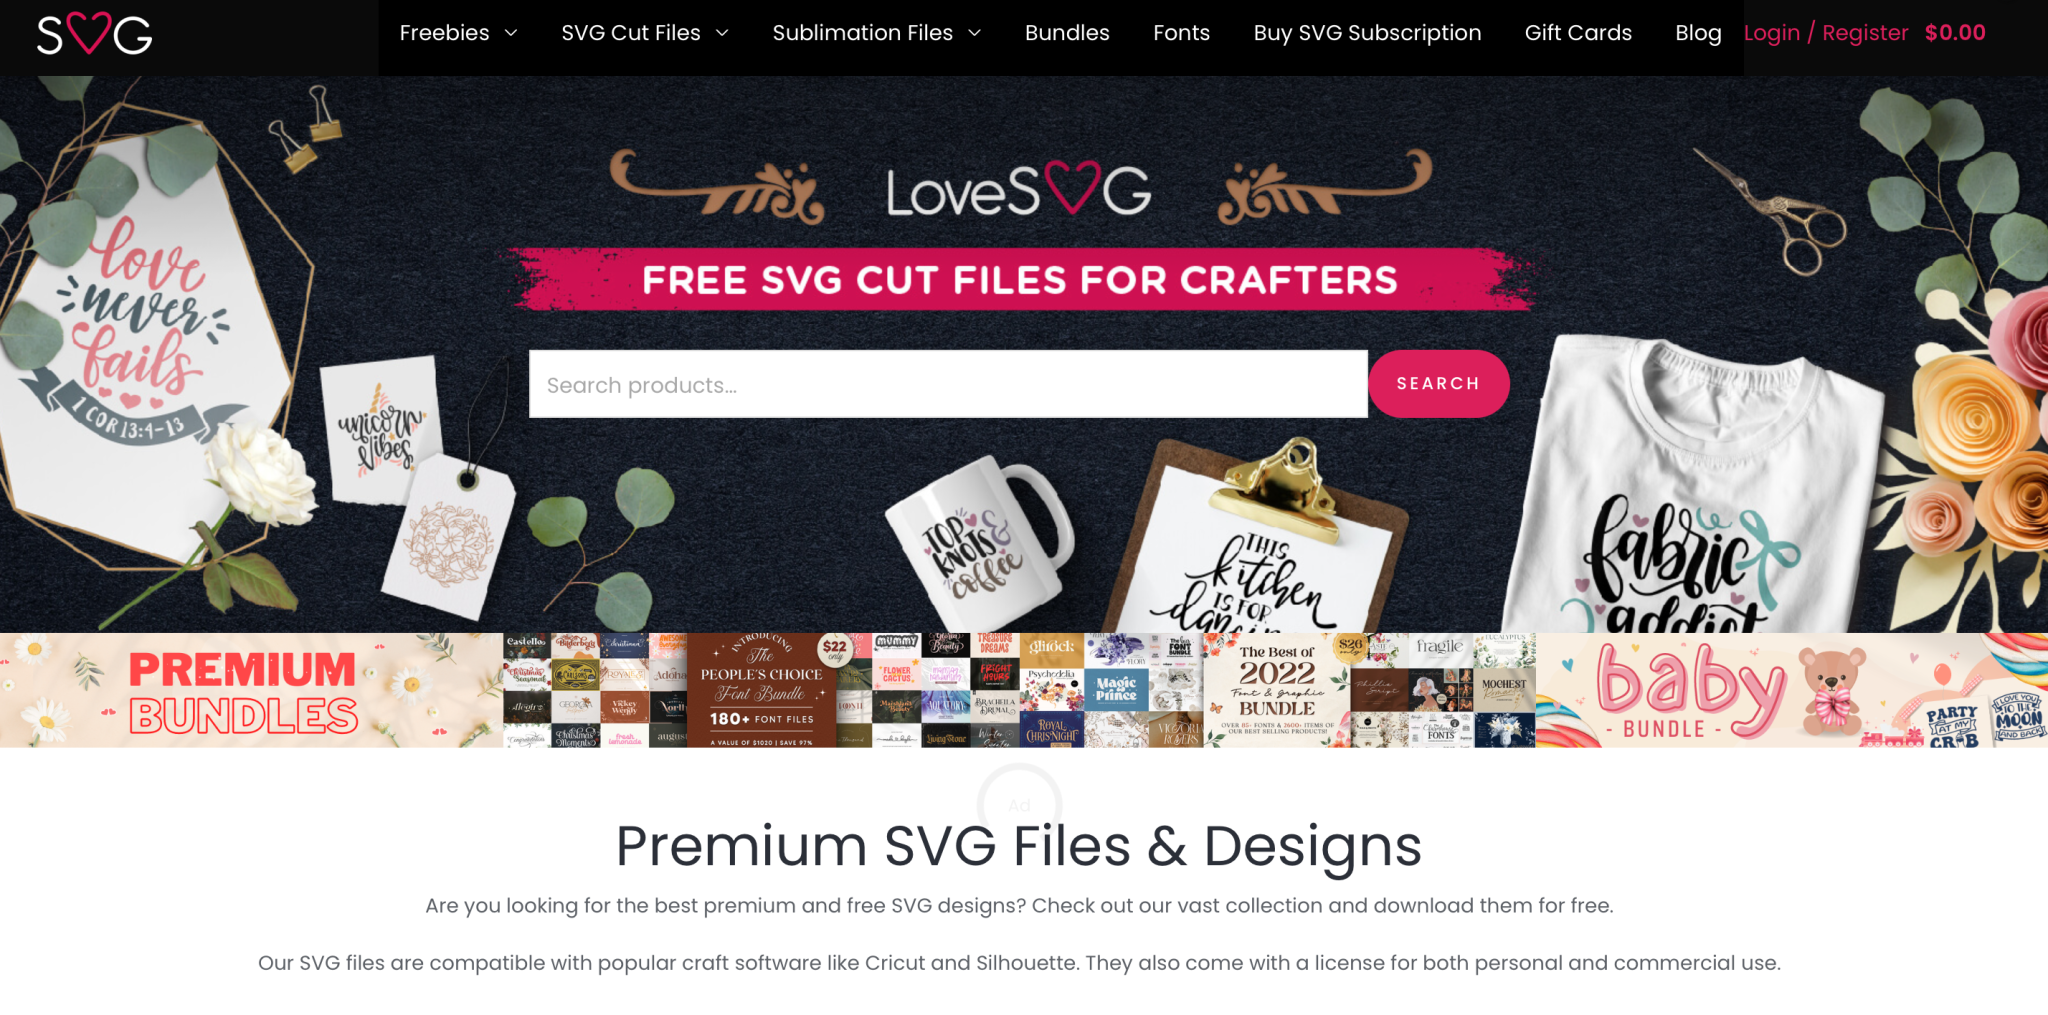 LoveSVG image and SVG subscription.